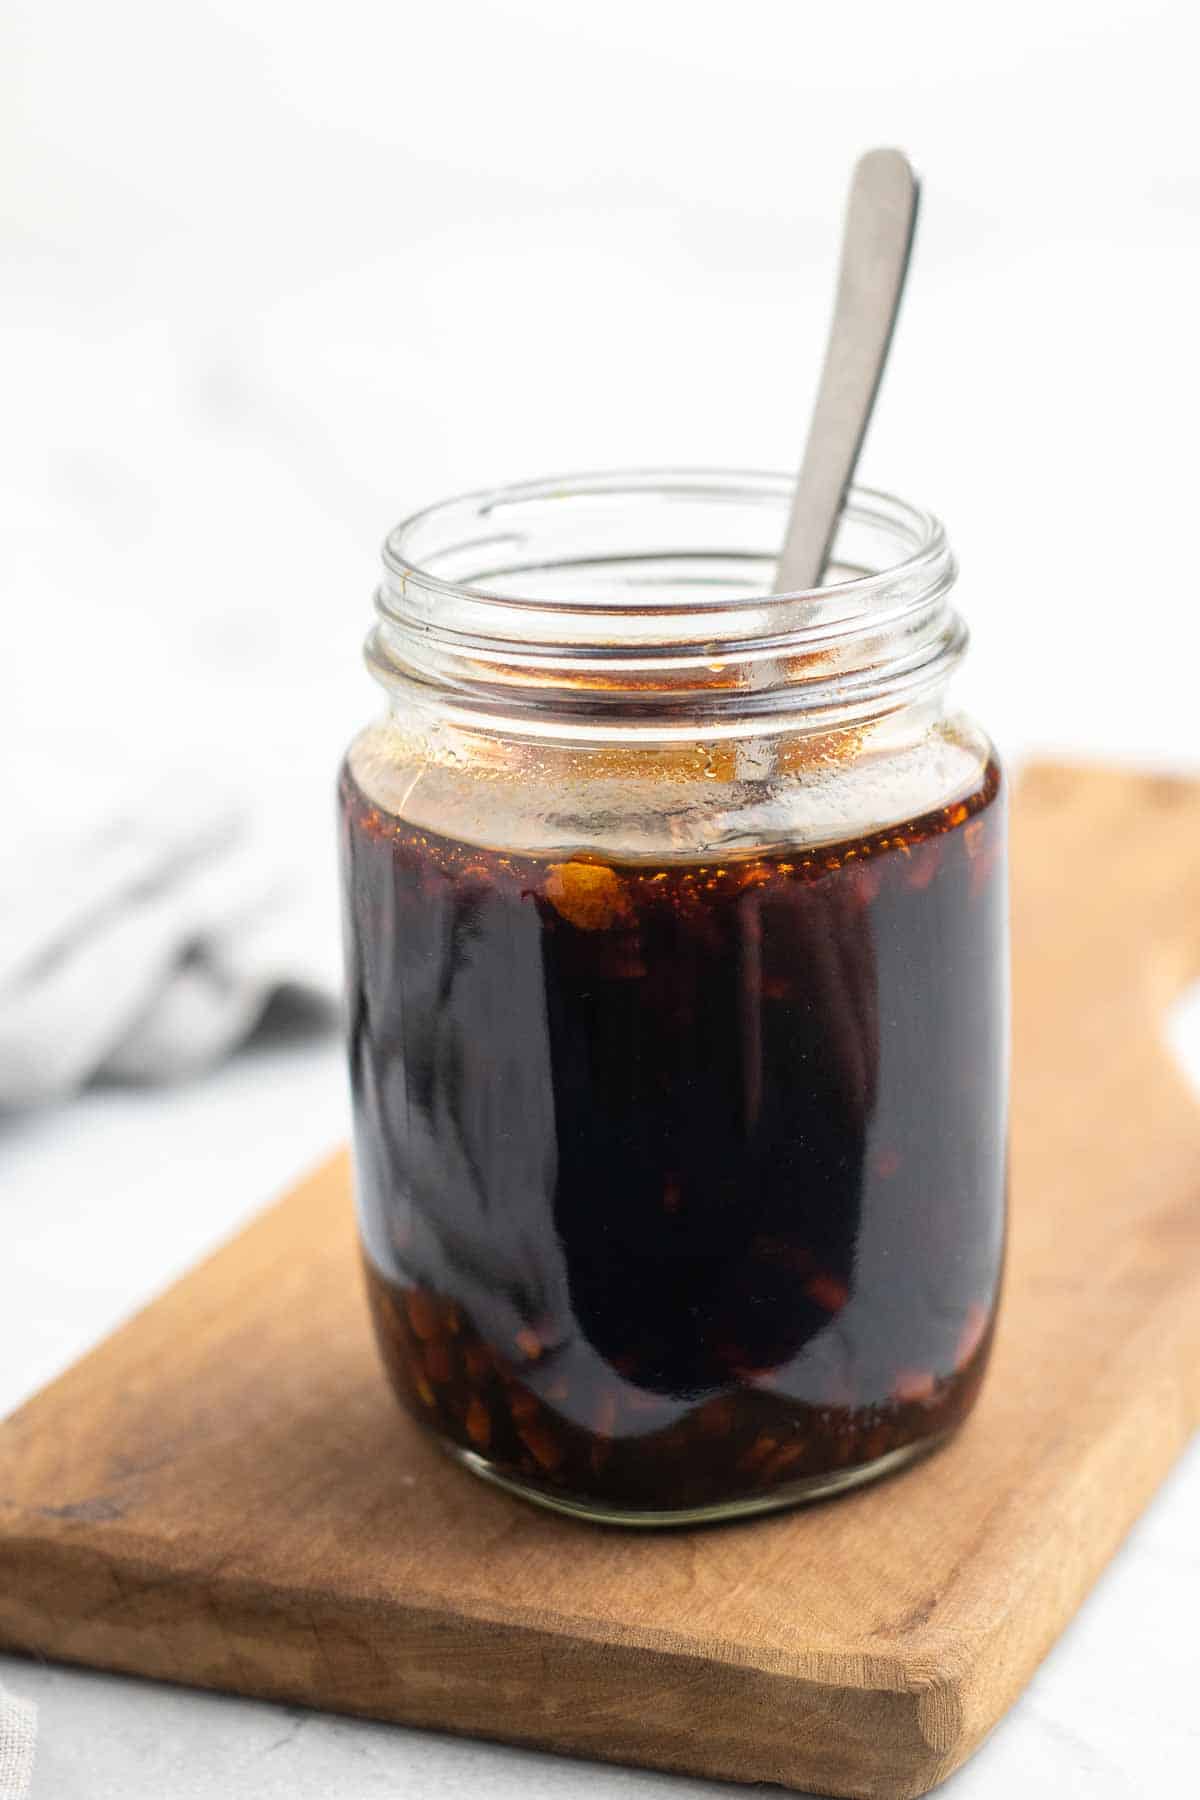 Sugar free teriyaki sauce in a glass mason jar with a metal spoon on a wooden serving tray